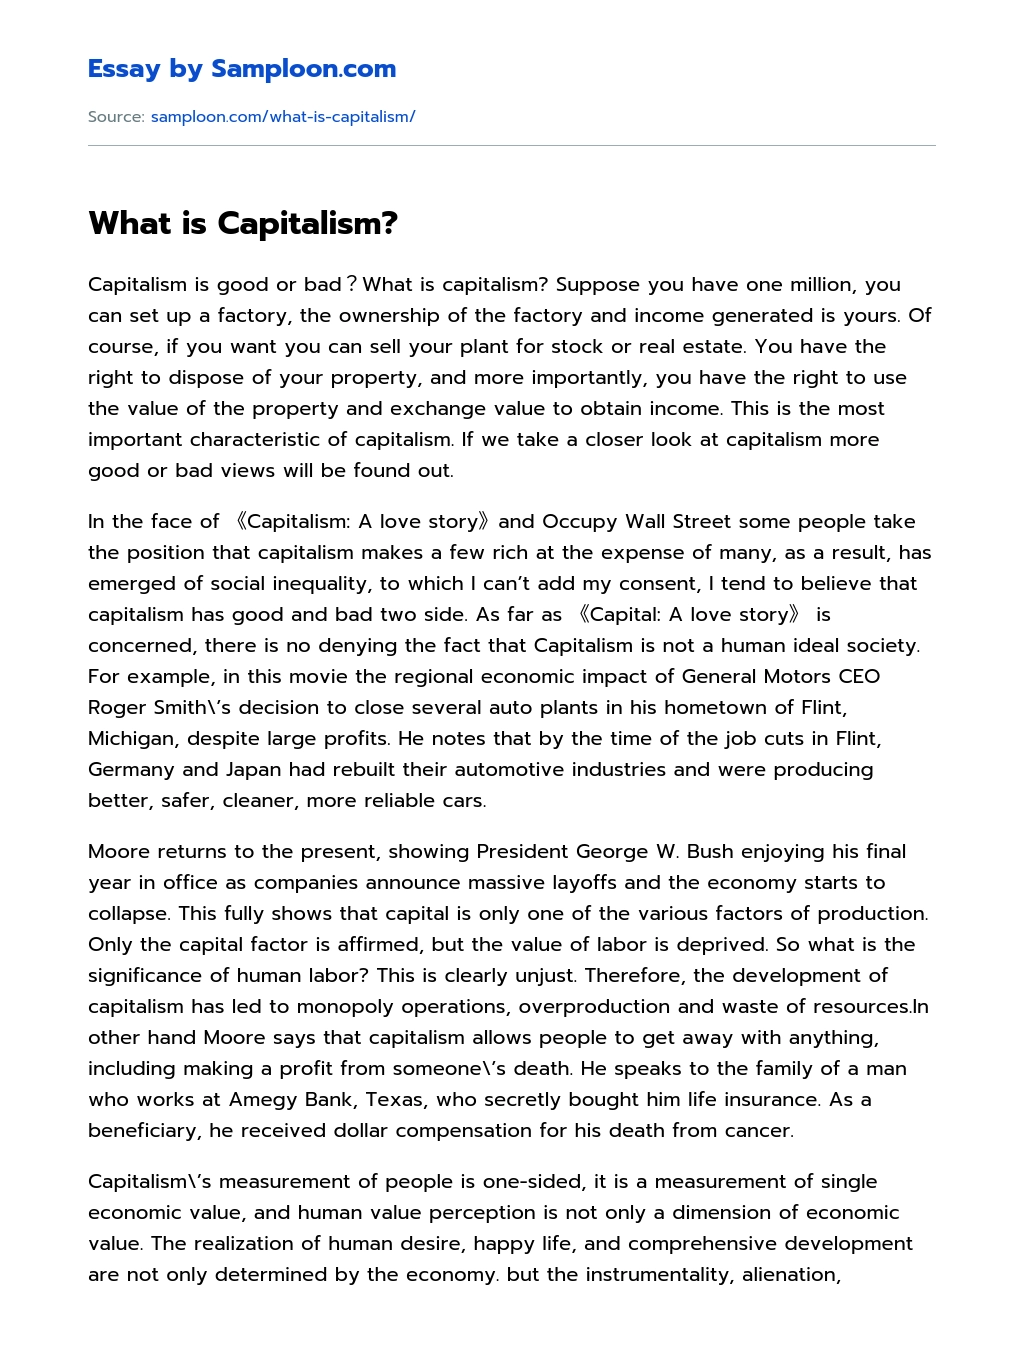 What is Capitalism? essay